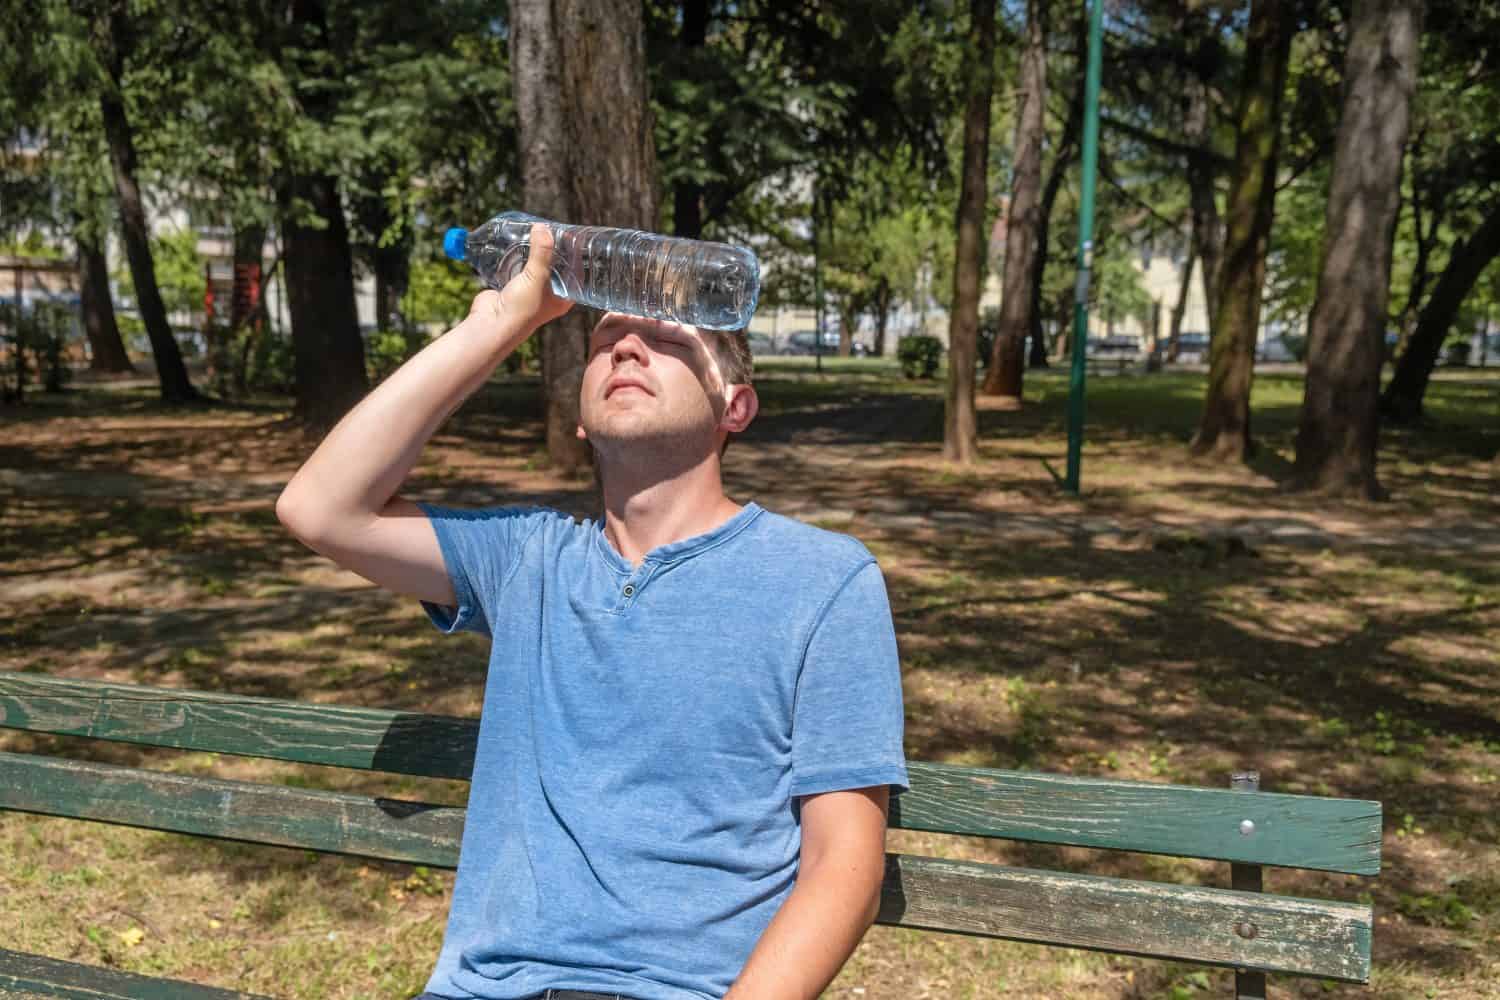 Man suffering from heat wave Charon in South Europe. Caucasian male presses bottle of water to face to cool off suffering from heat sitting outdoors